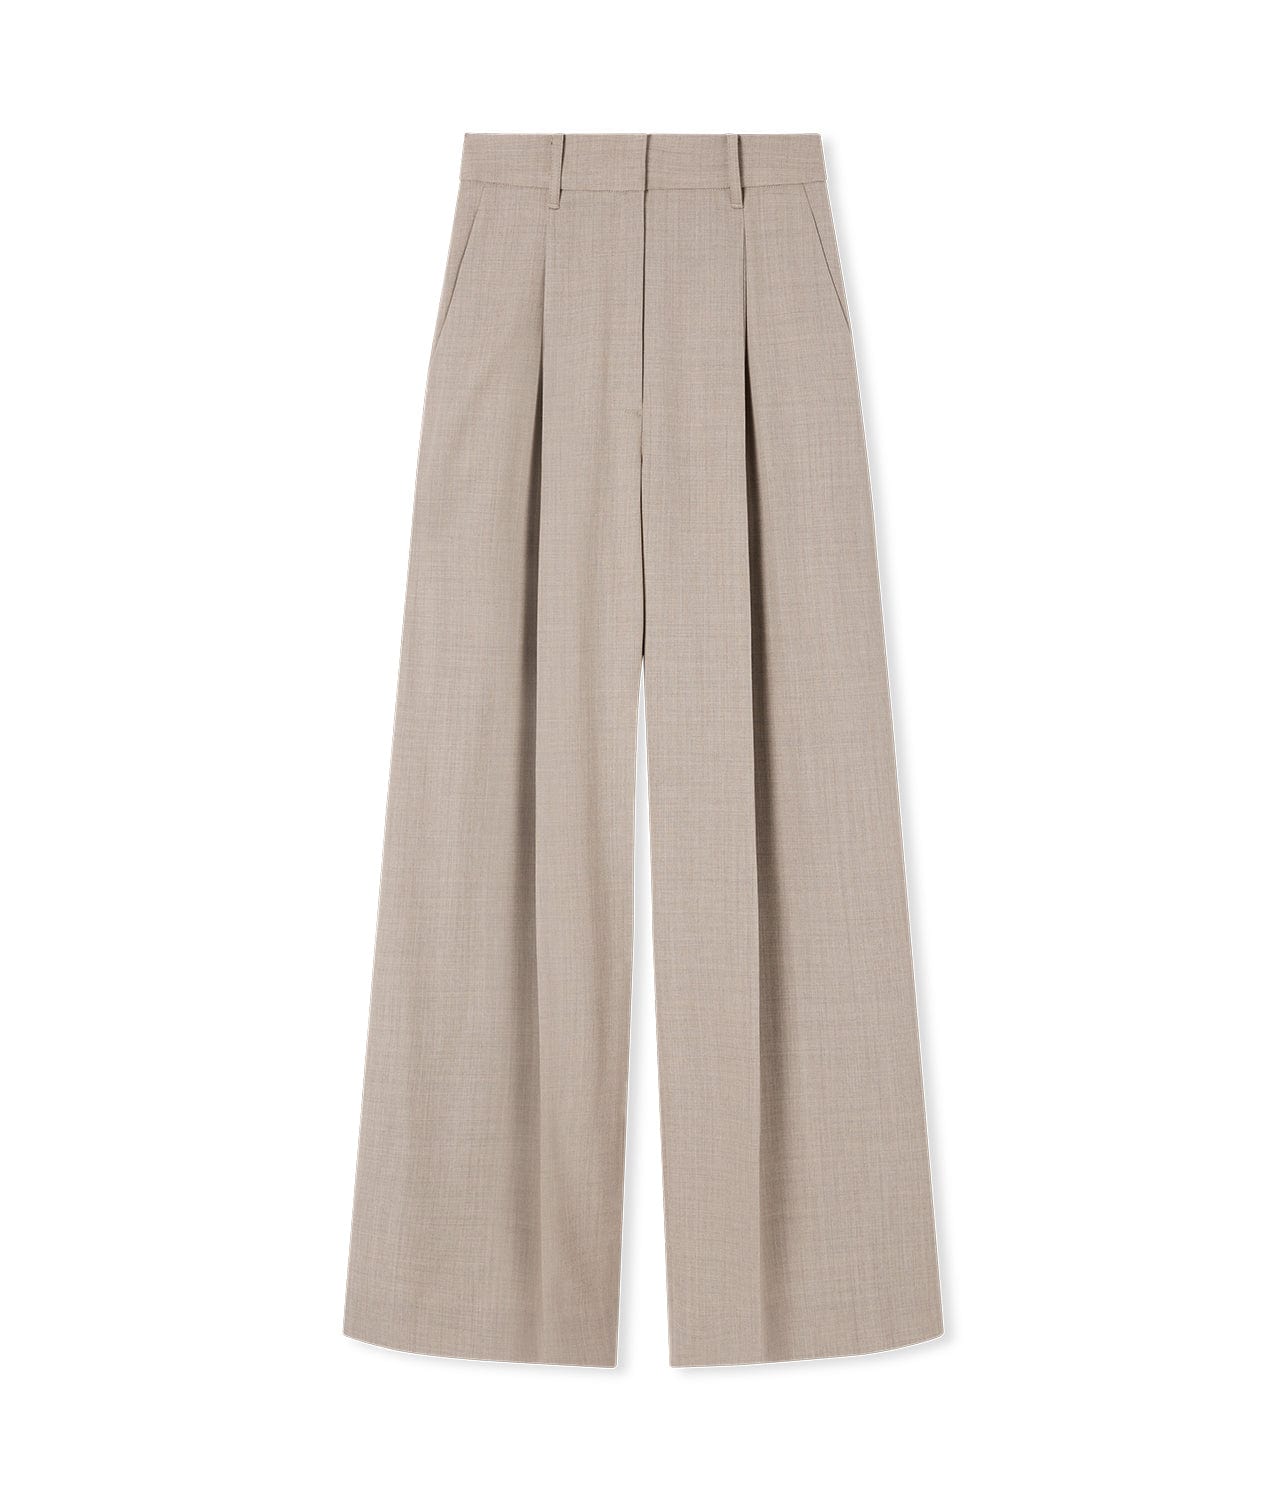 FOR ARTISTS ONLY THE GODDARD PANT- ALMOND